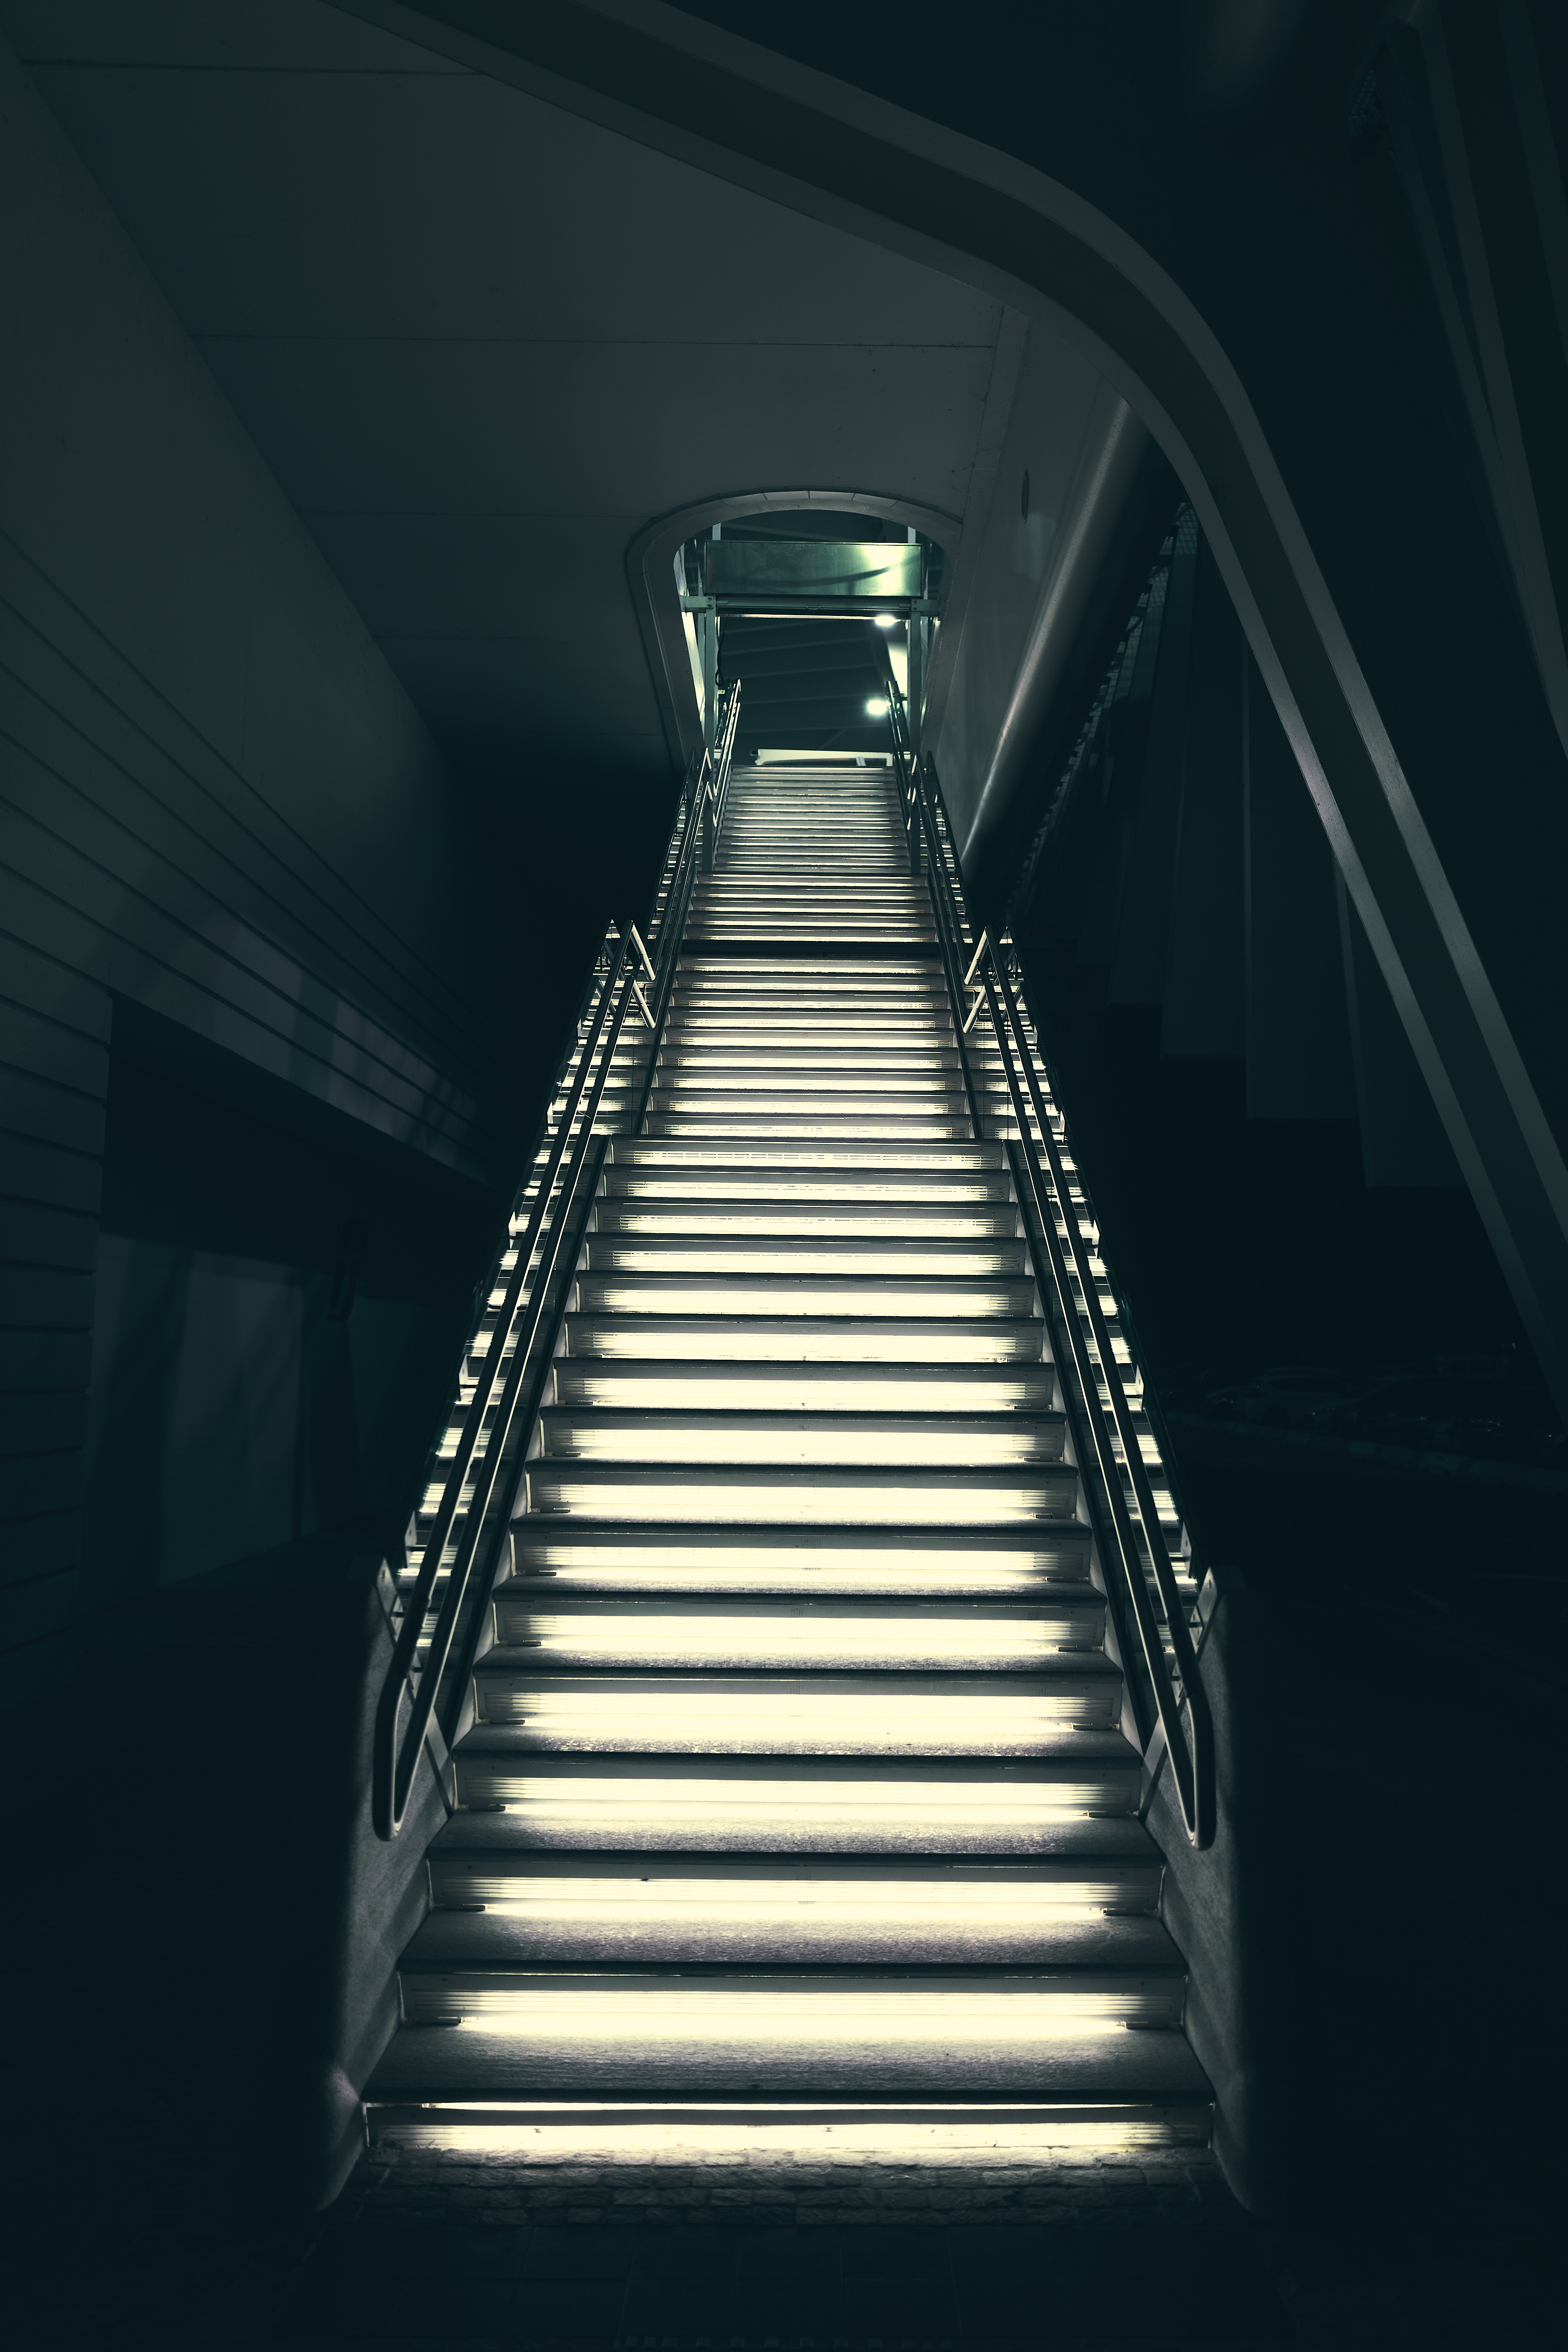 backlight, miscellanea, miscellaneous, illumination, stairs, ladder, output, exit FHD, 4K, UHD